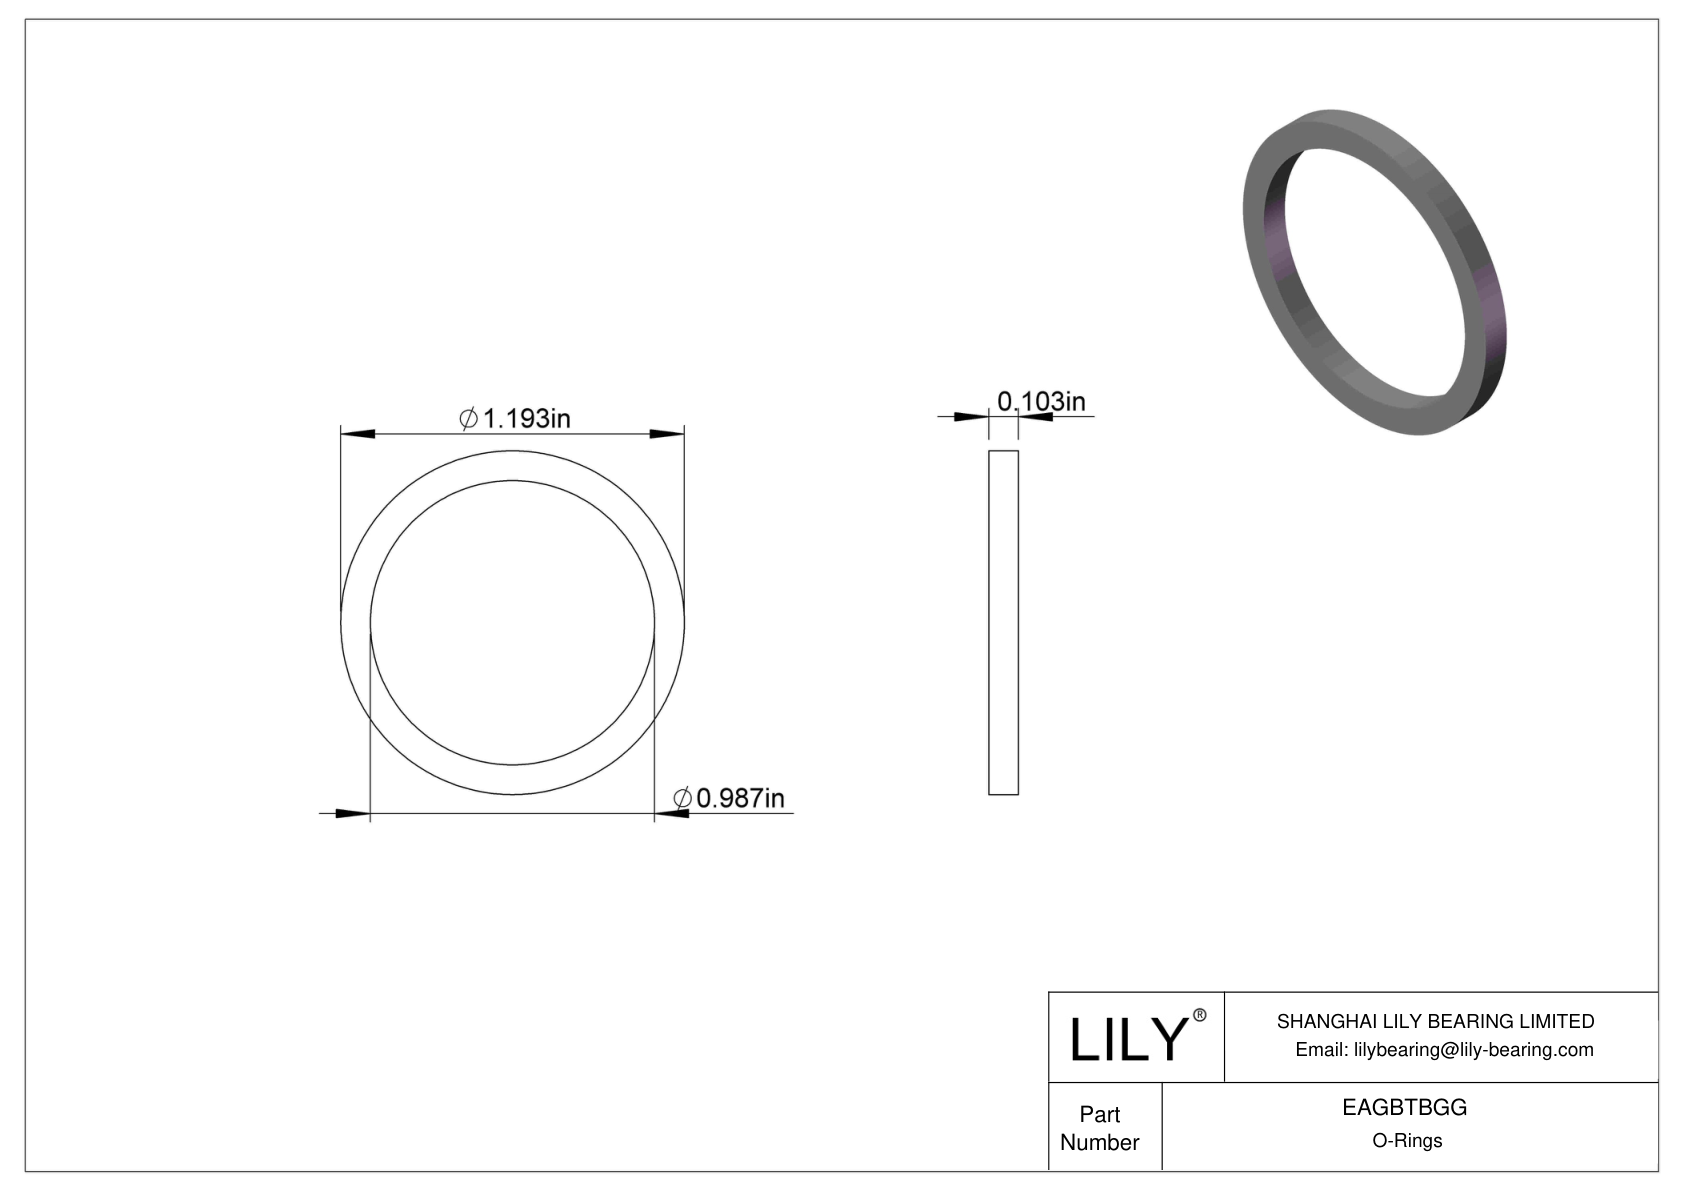 EAGBTBGG Oil Resistant O-Rings Square cad drawing